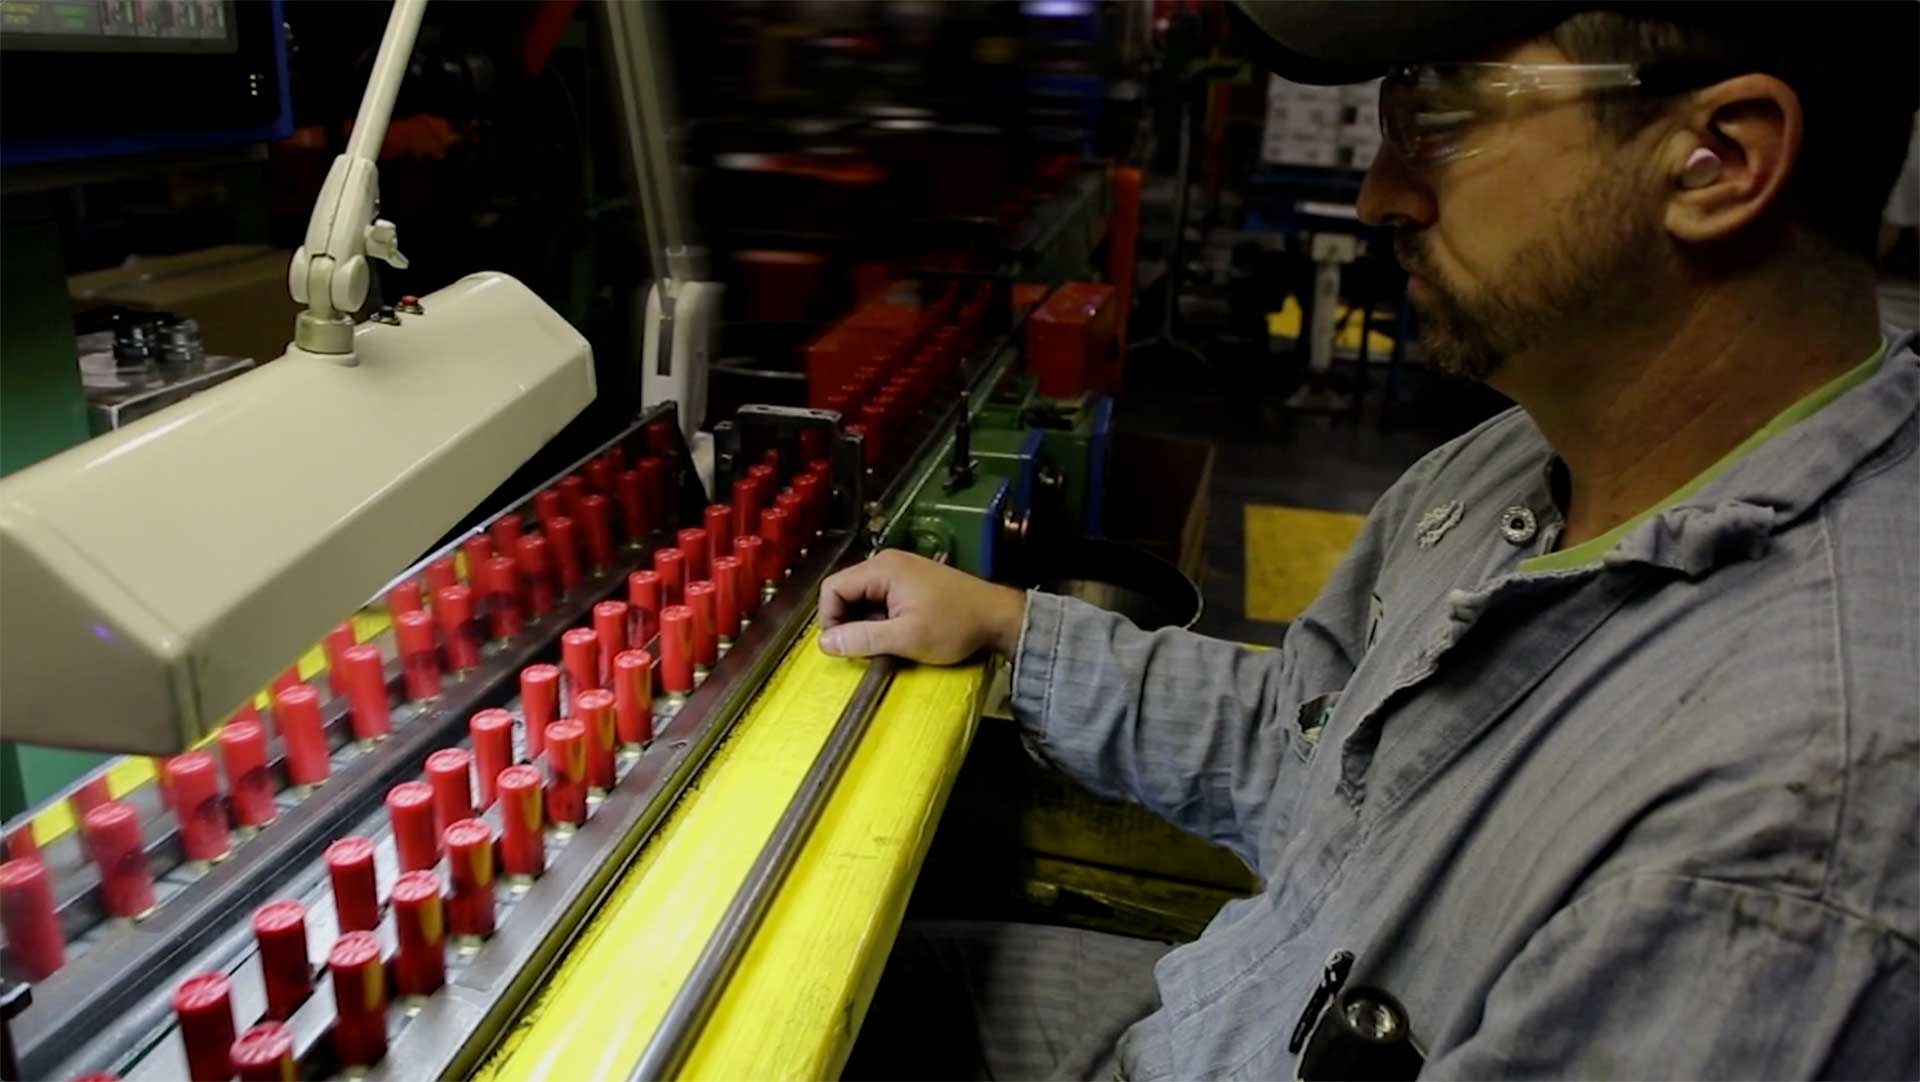 A man watches red Winchester shotshells being readied for packaging.